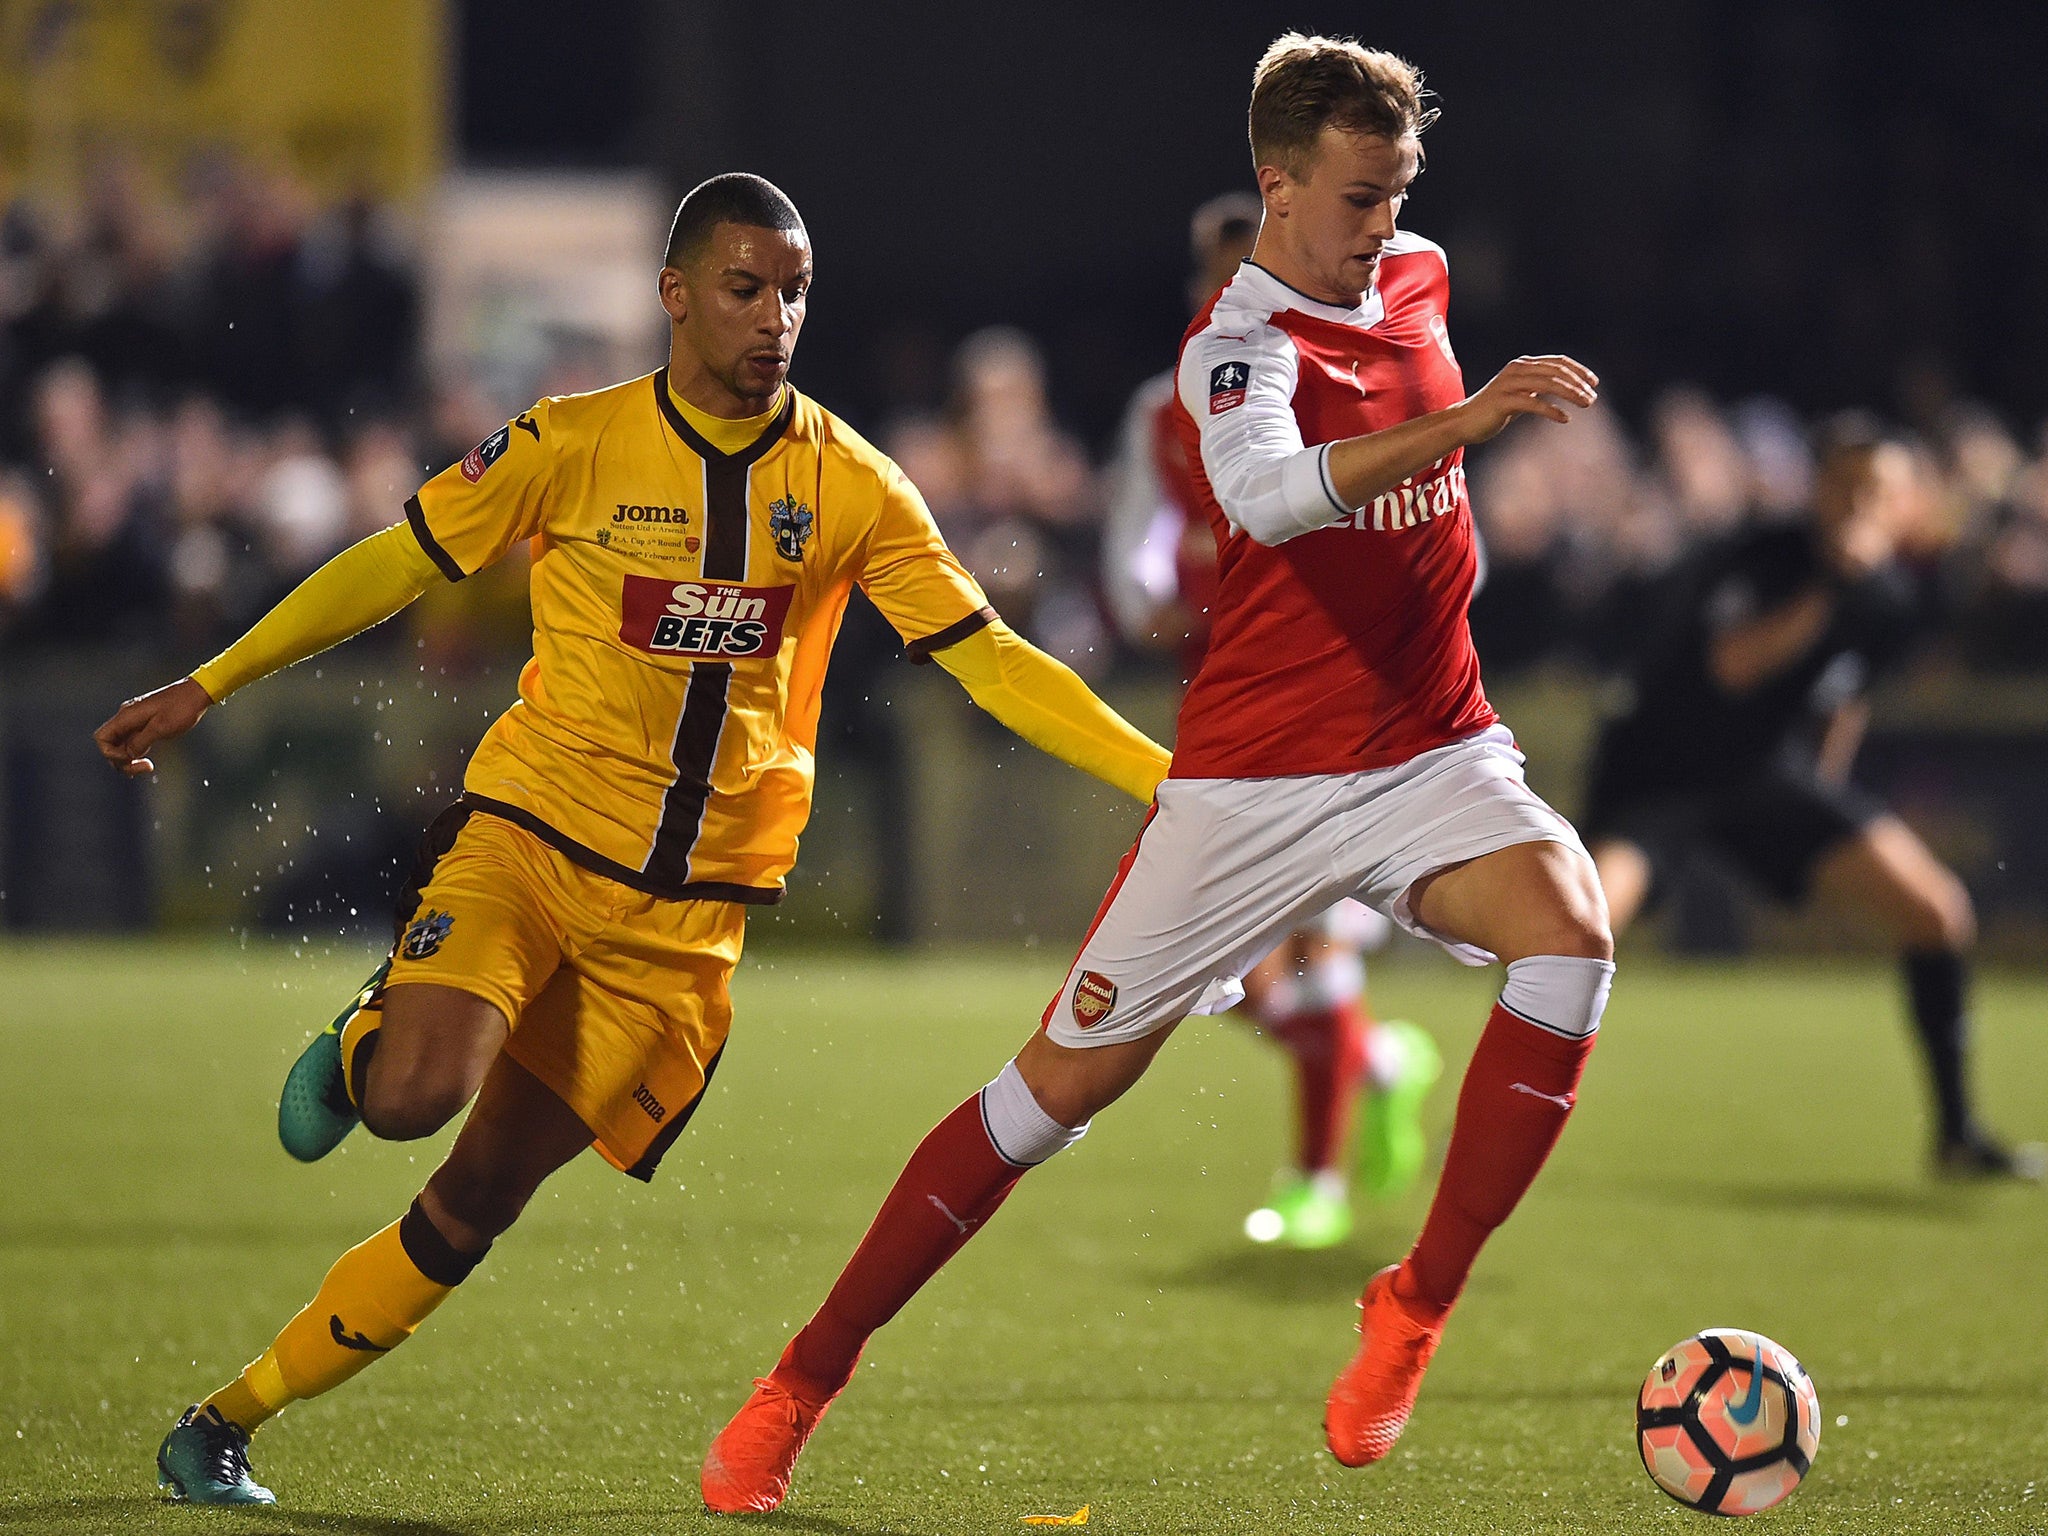 Sutton will host Arsenal in the biggest match in their history